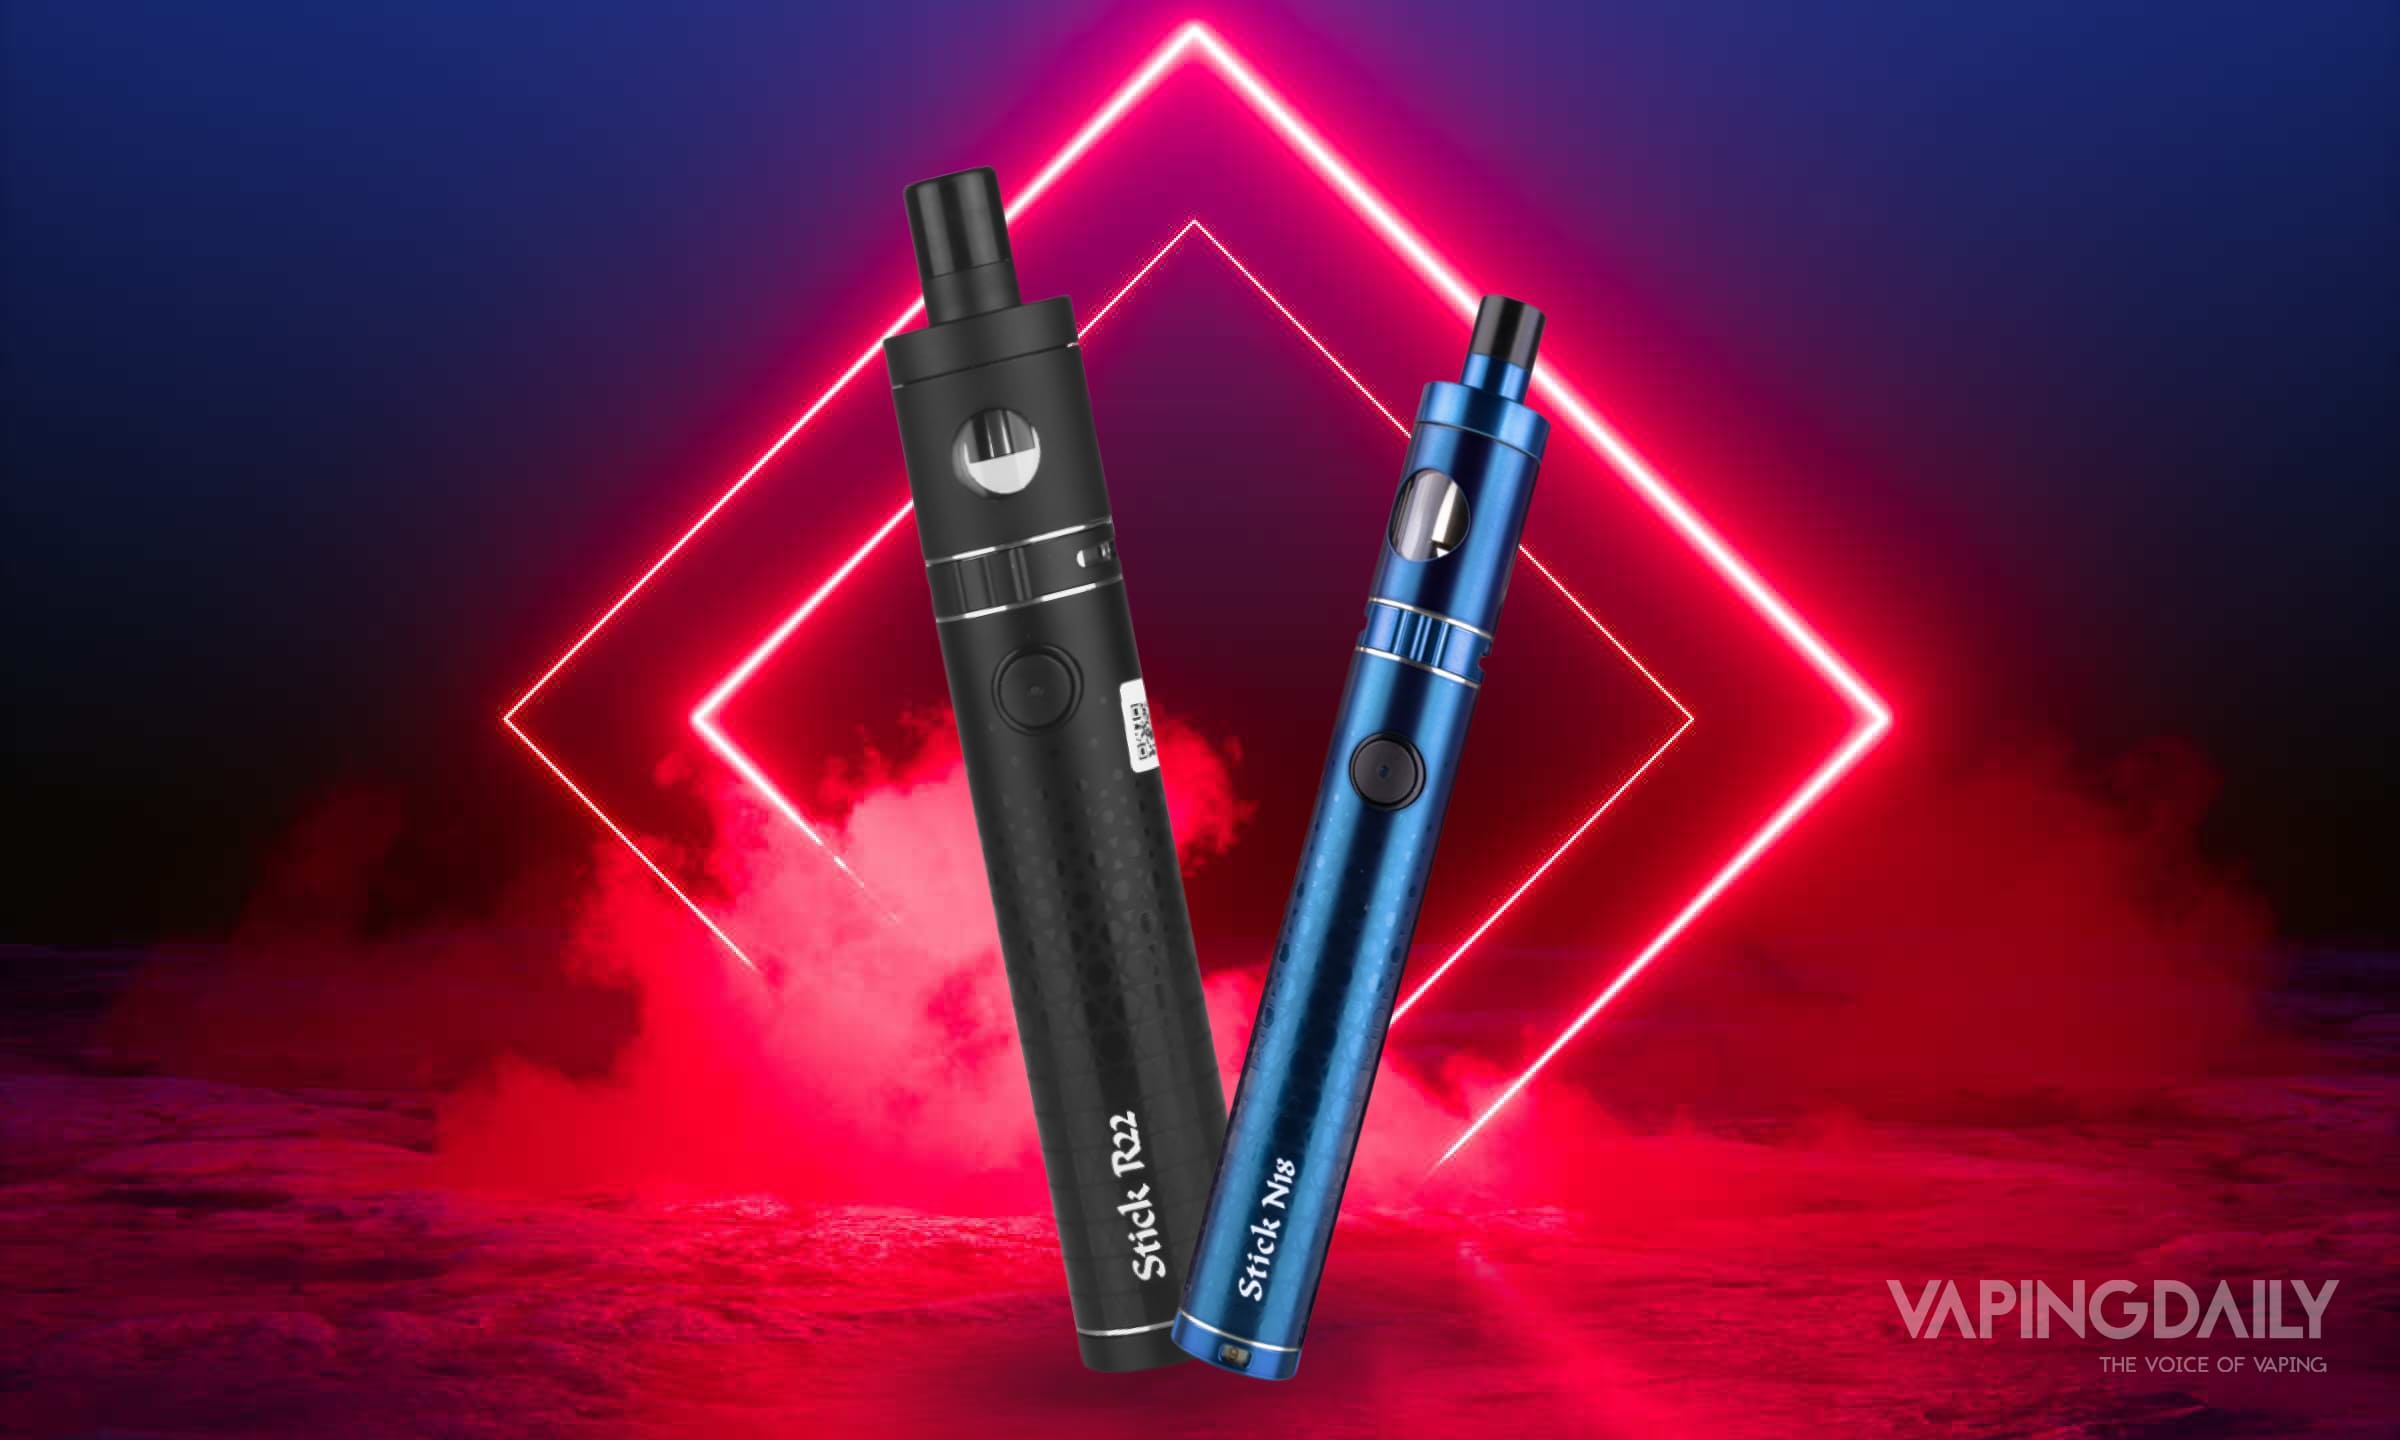 The New Smok Stick N18 & R22: Which Is Better?